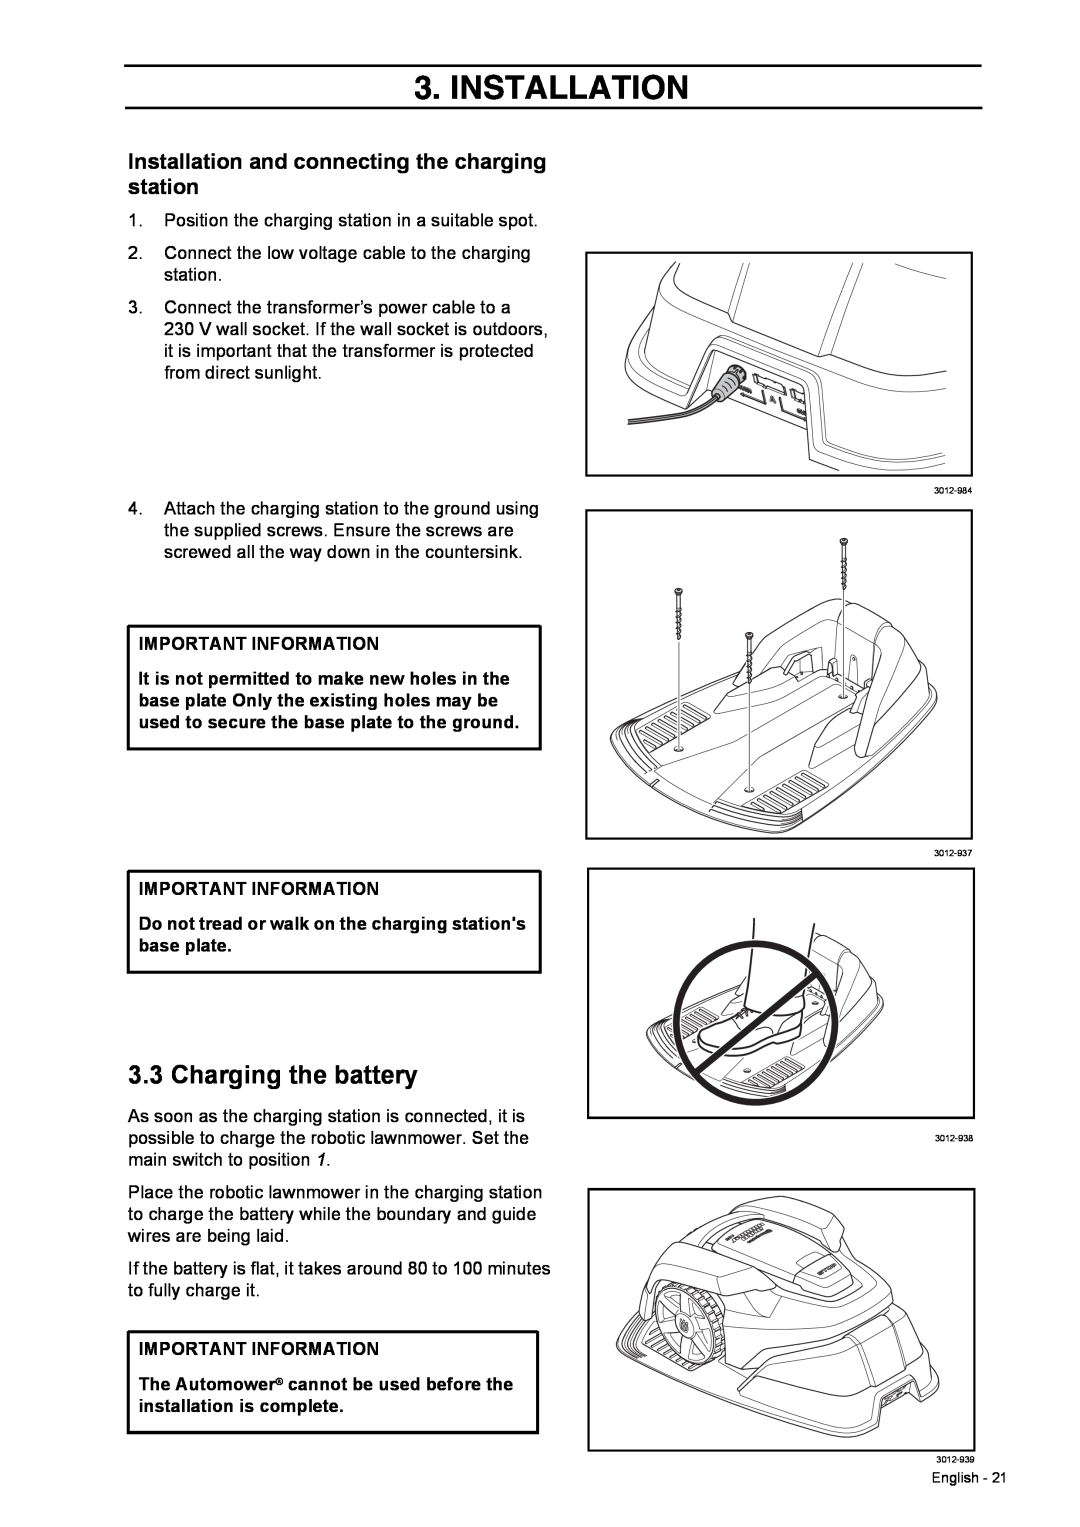 Husqvarna 308 manual Charging the battery, Installation and connecting the charging station, Important Information 